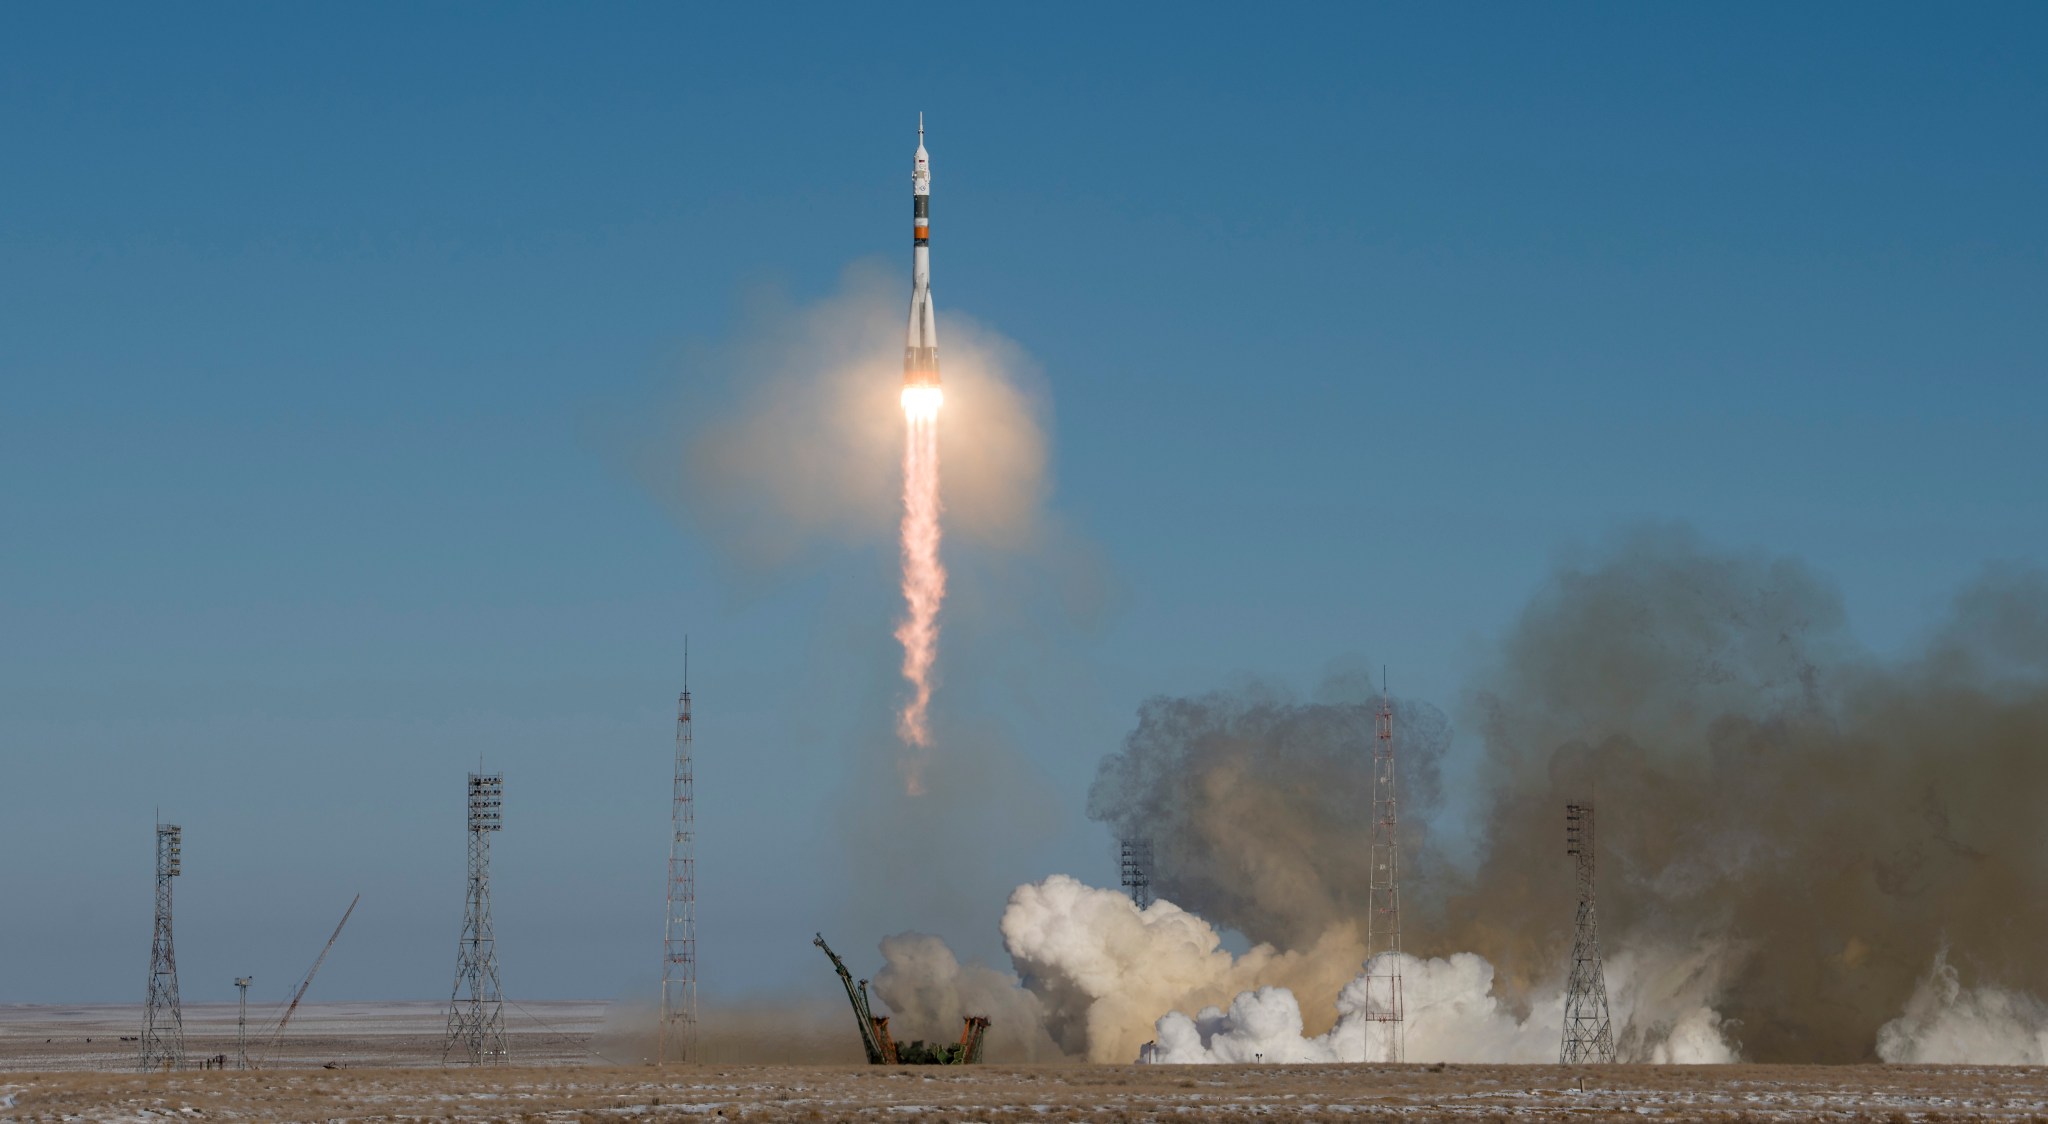 Expedition 54 launches to the International Space Station